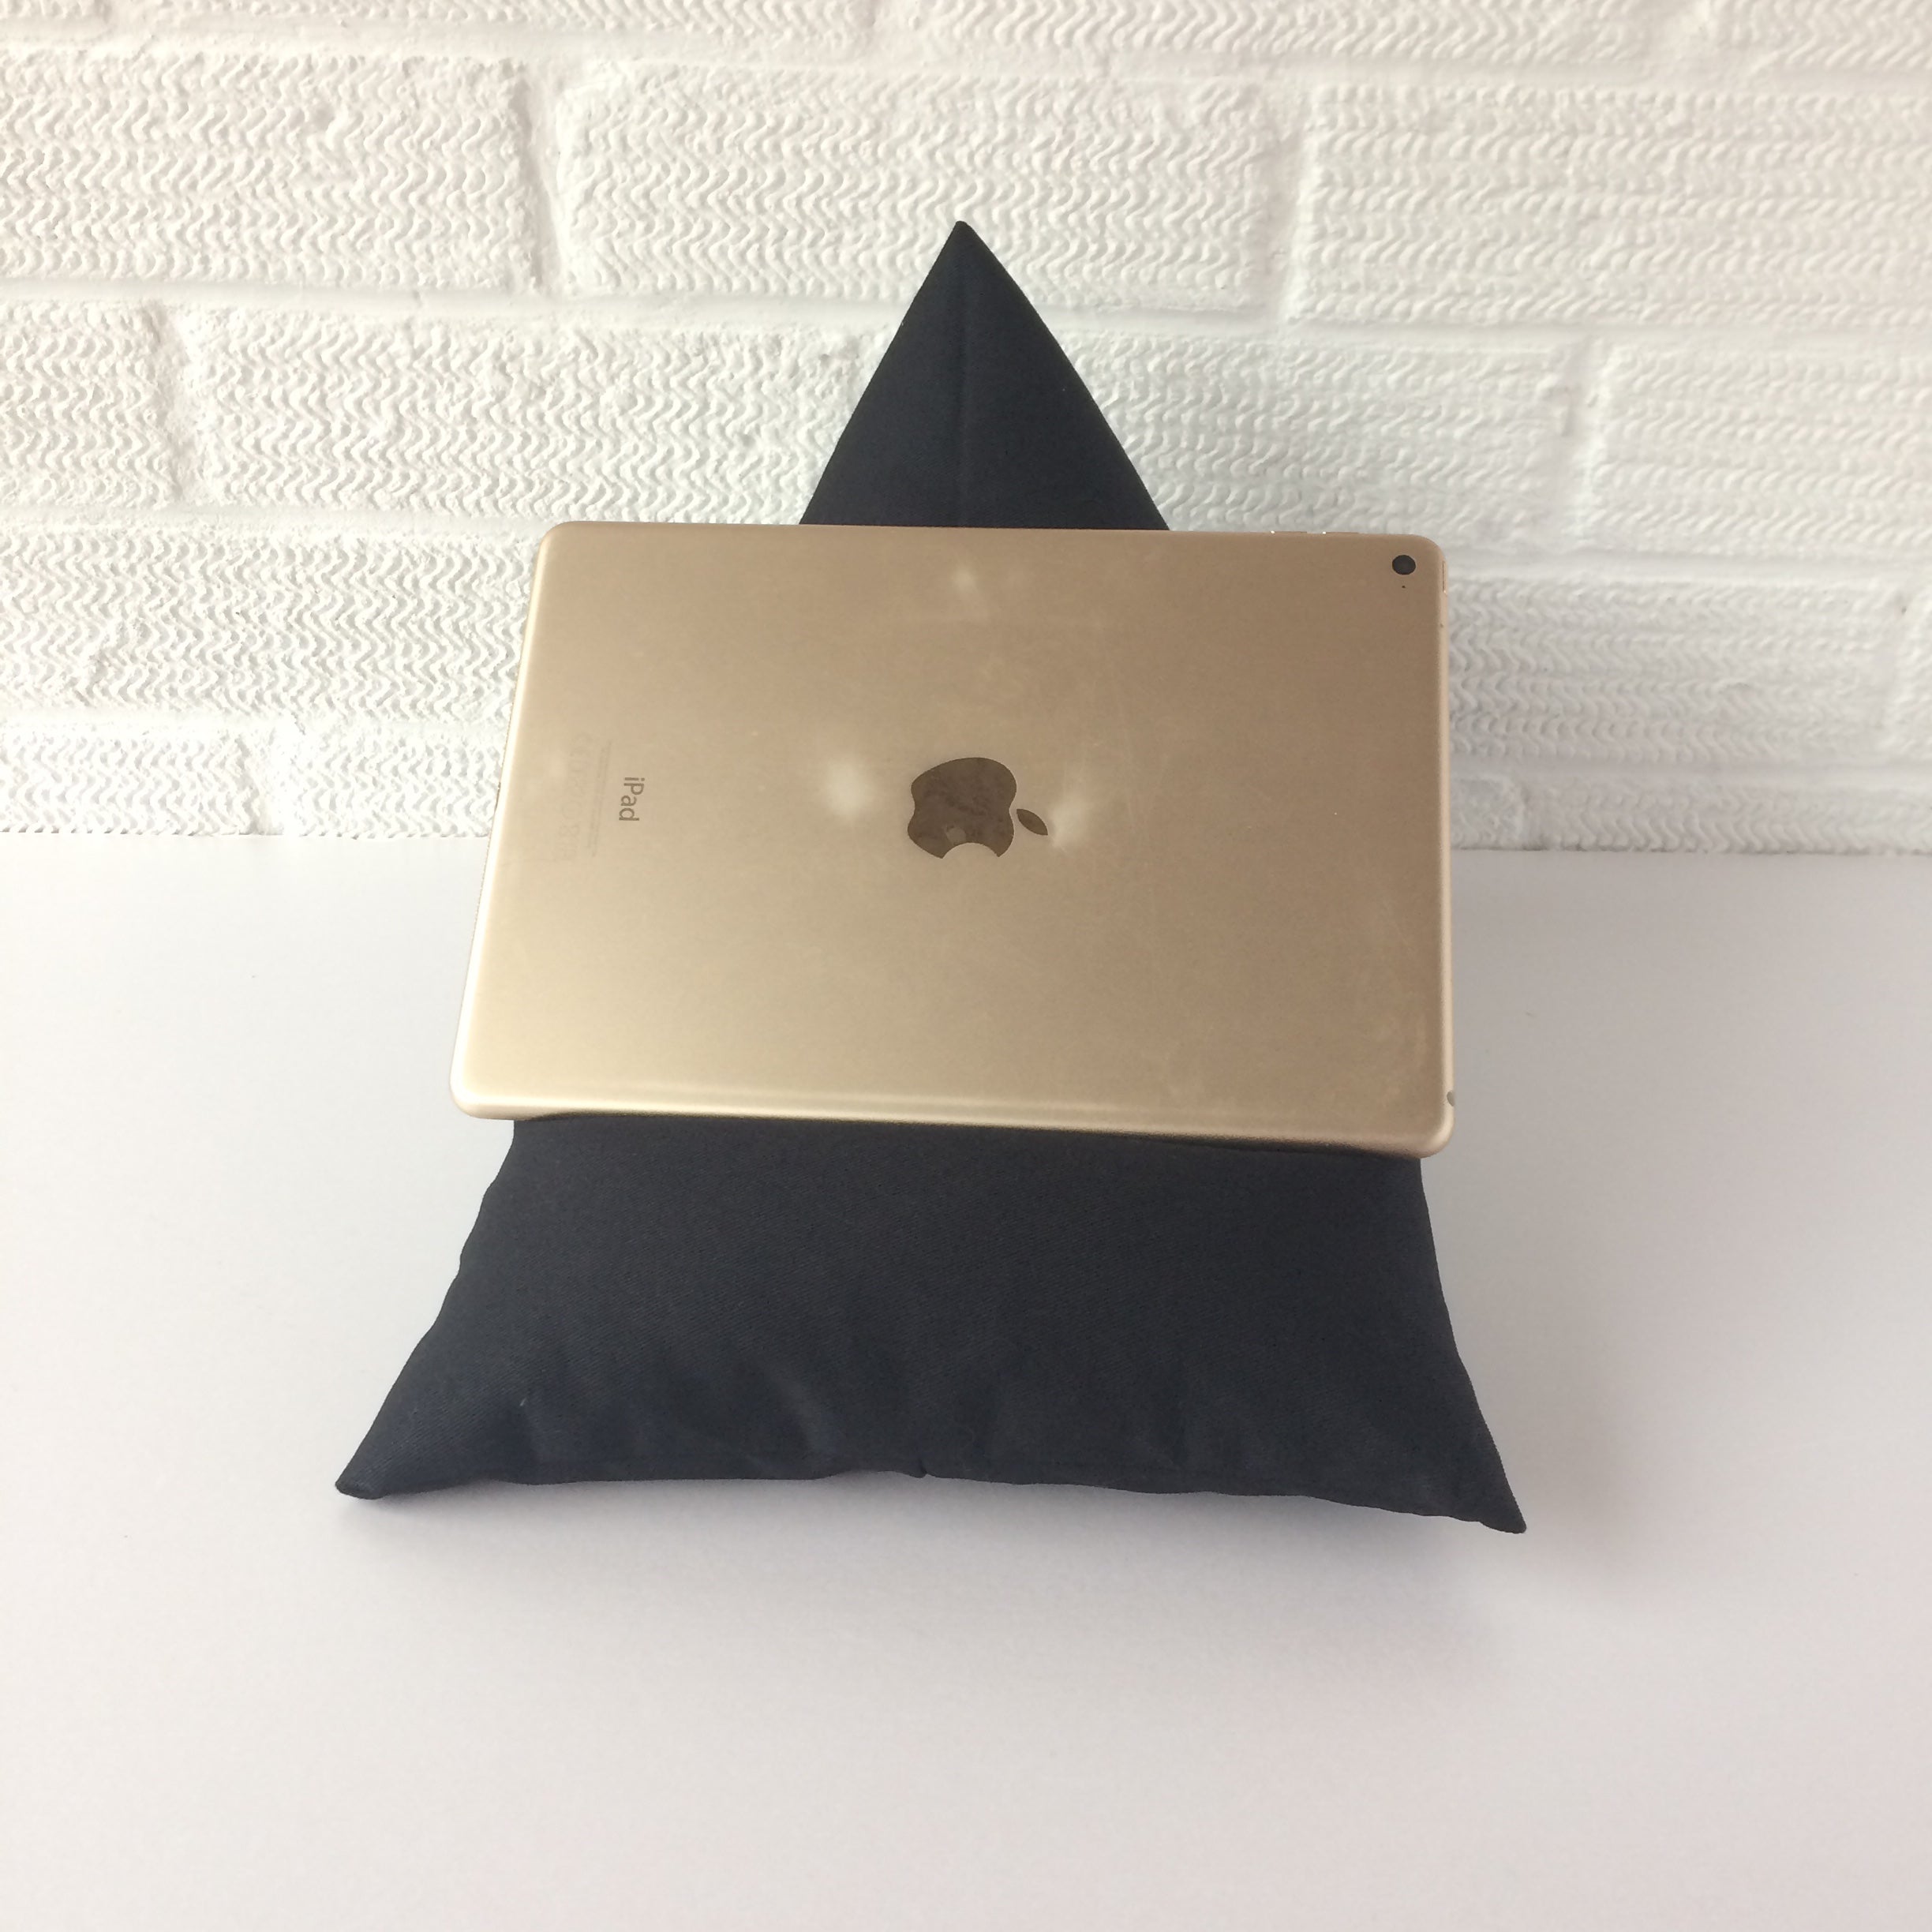 Ipad or tablet bean bag holder in black drill canvas fabric